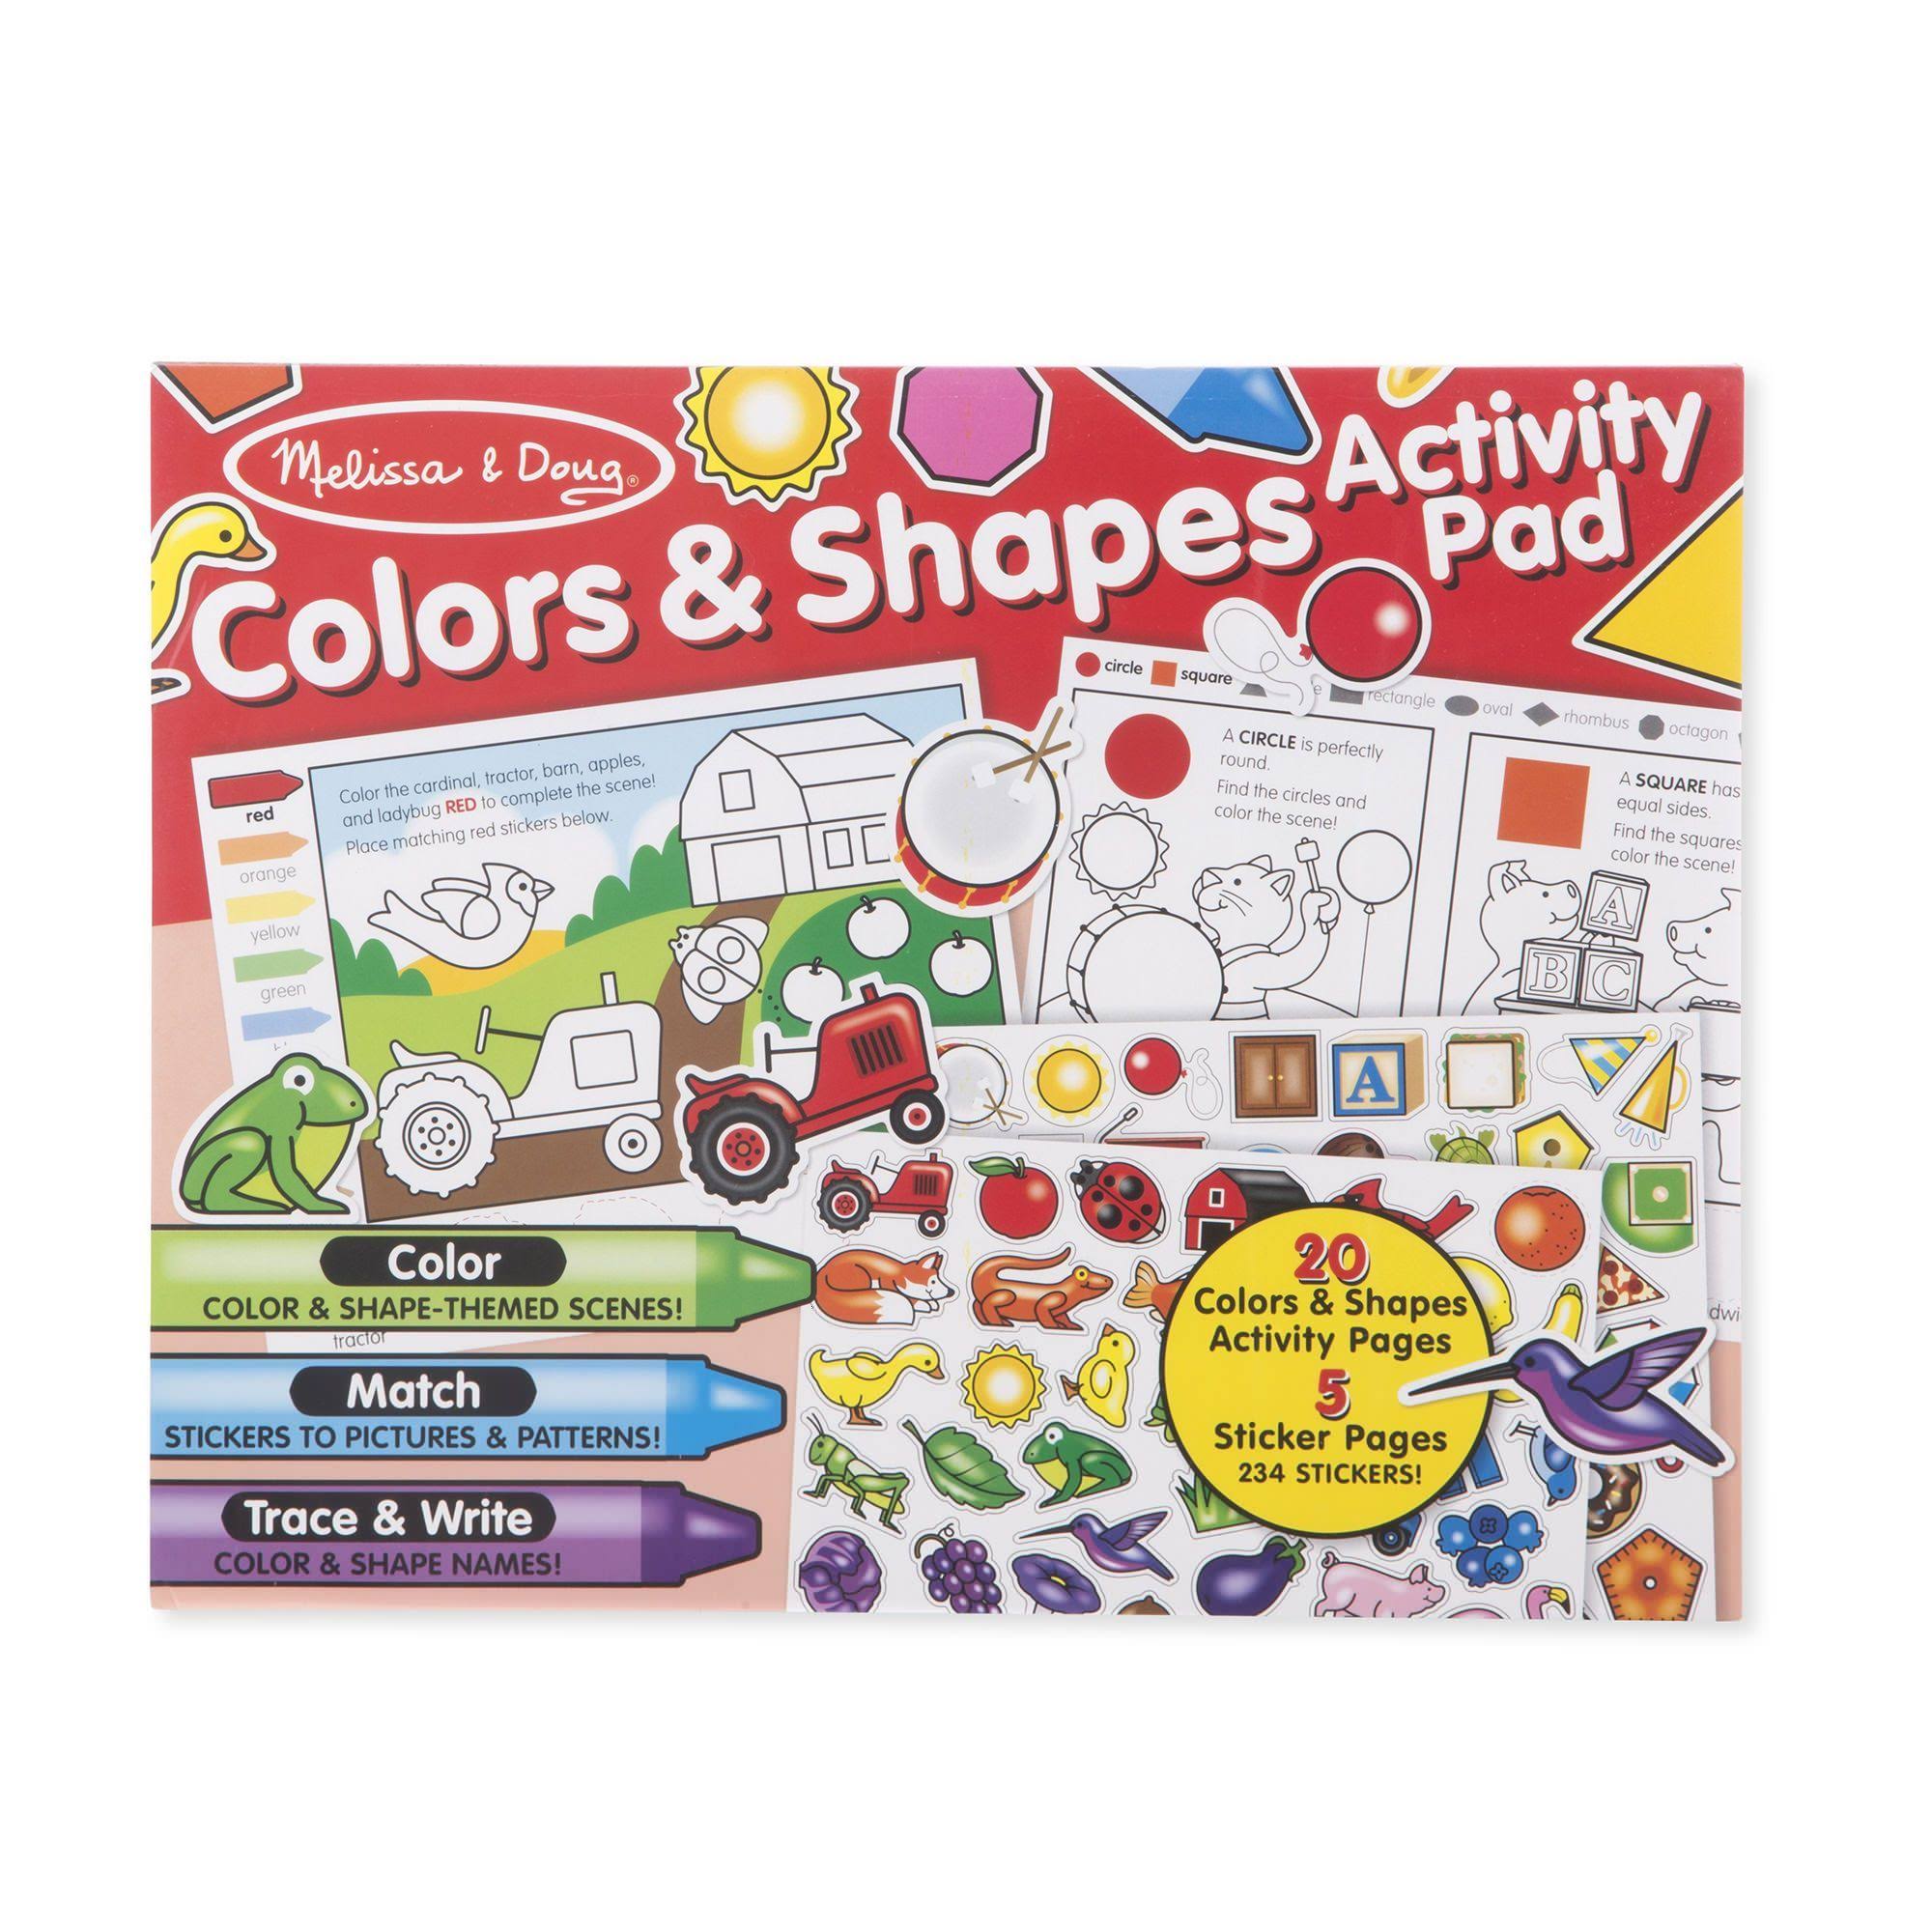 Melissa & Doug Colors and Shapes Activity Pad